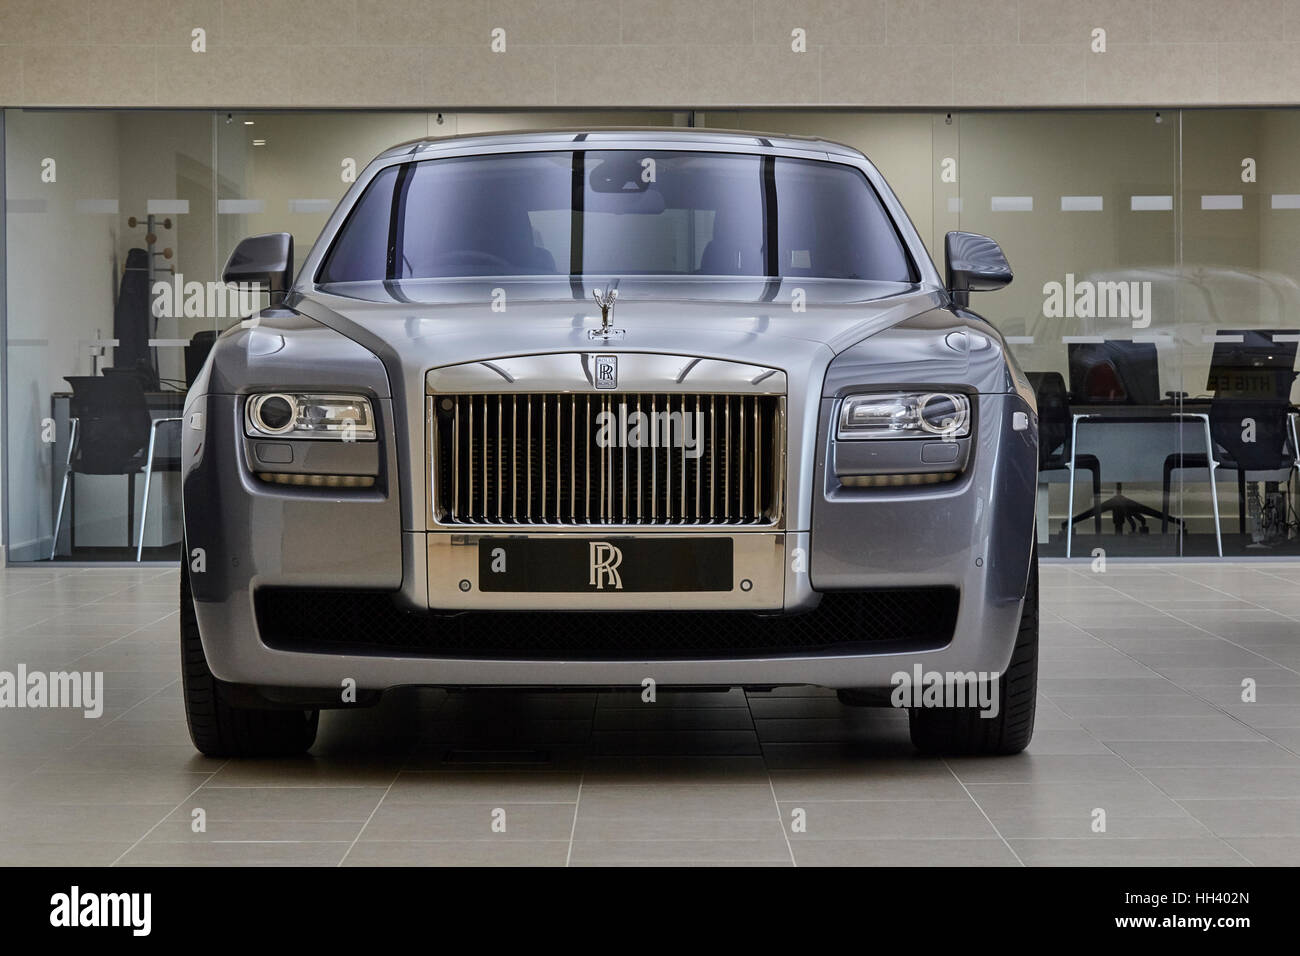 Rolls-royce Motor Cars, Rolls Royce Ghost Banque D'Images